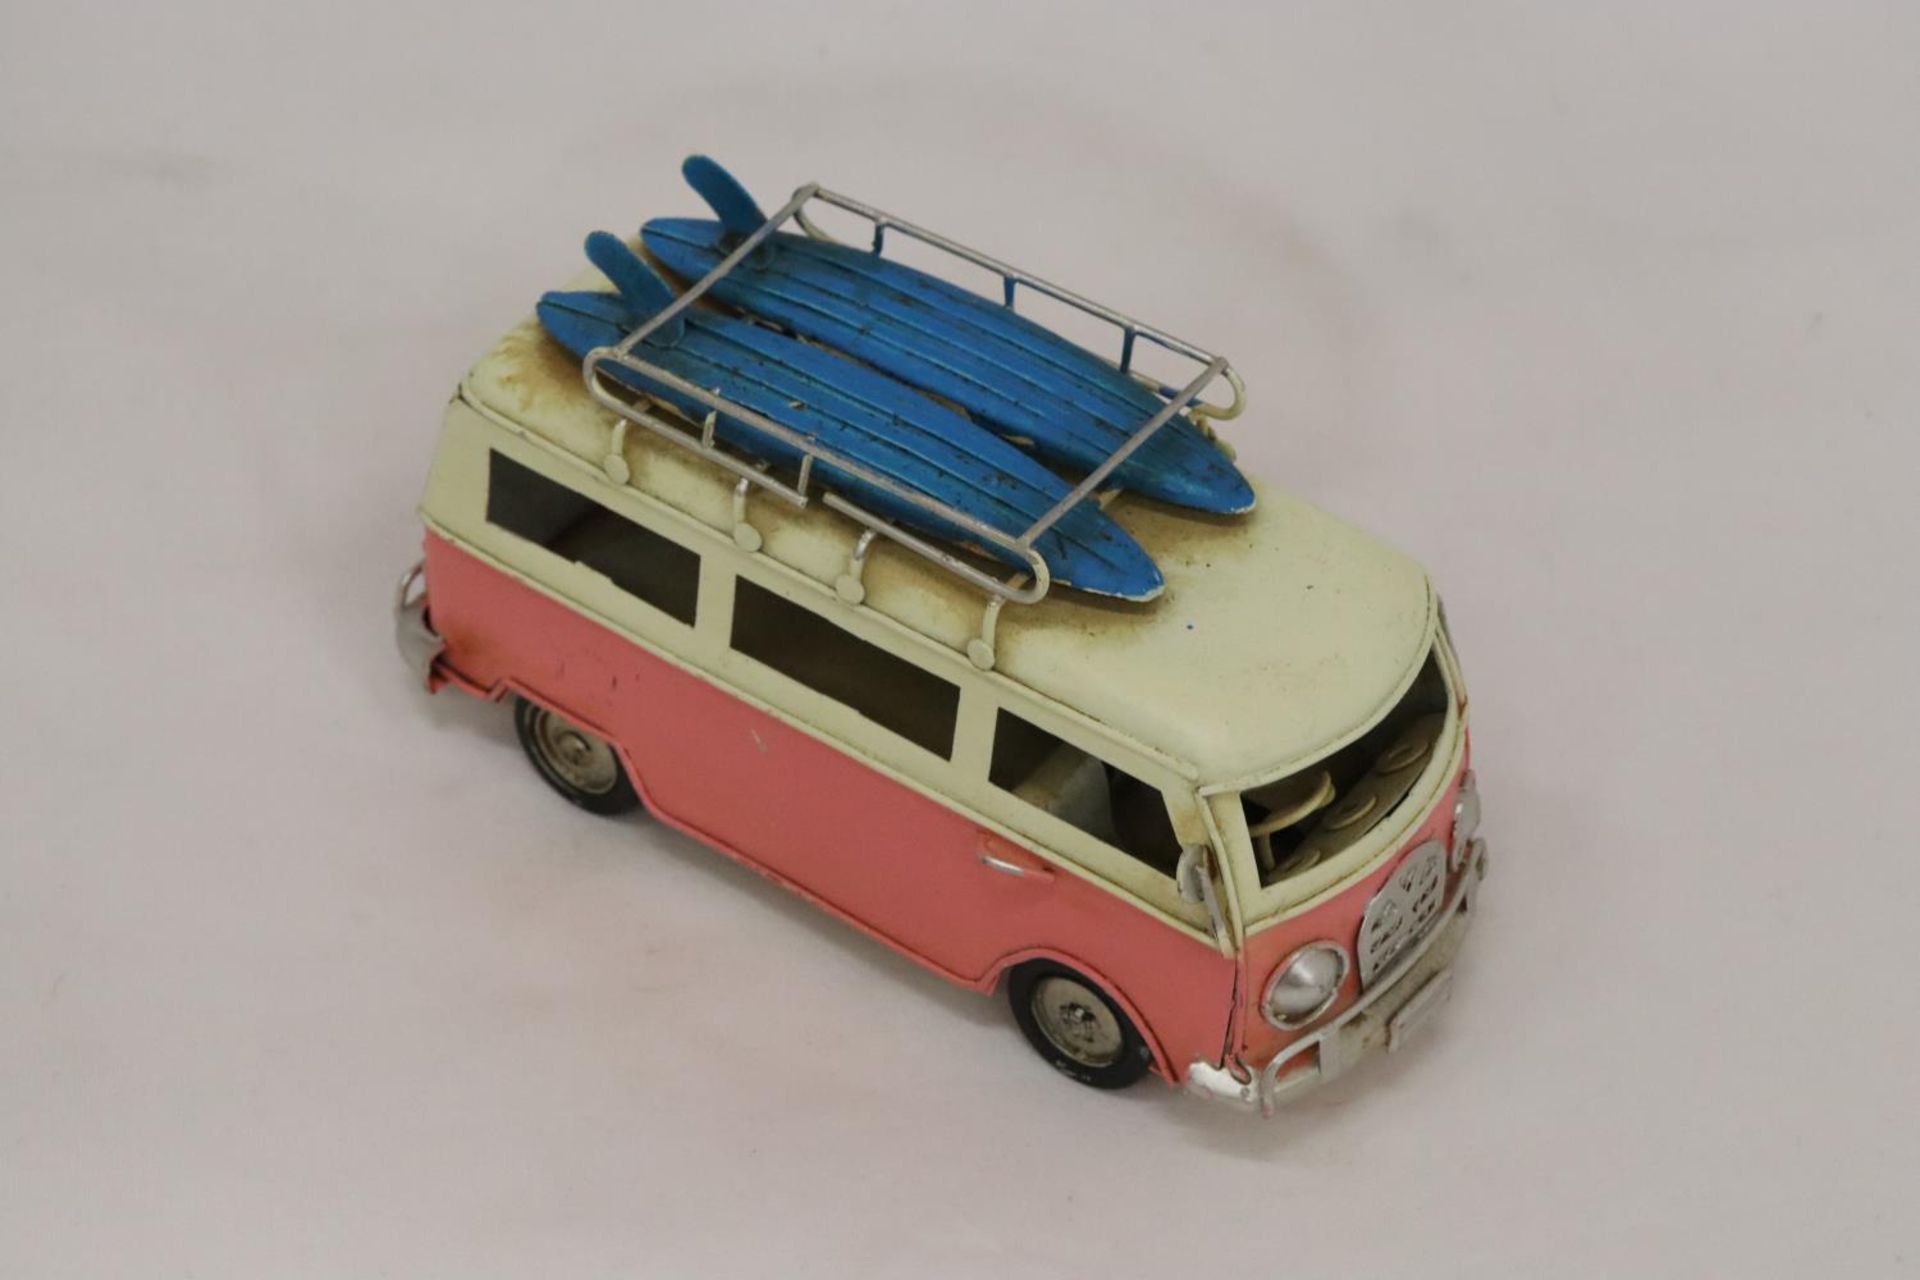 A TIN PLATE VOLKSWAGON SURFING CAMPER VAN - Image 6 of 6